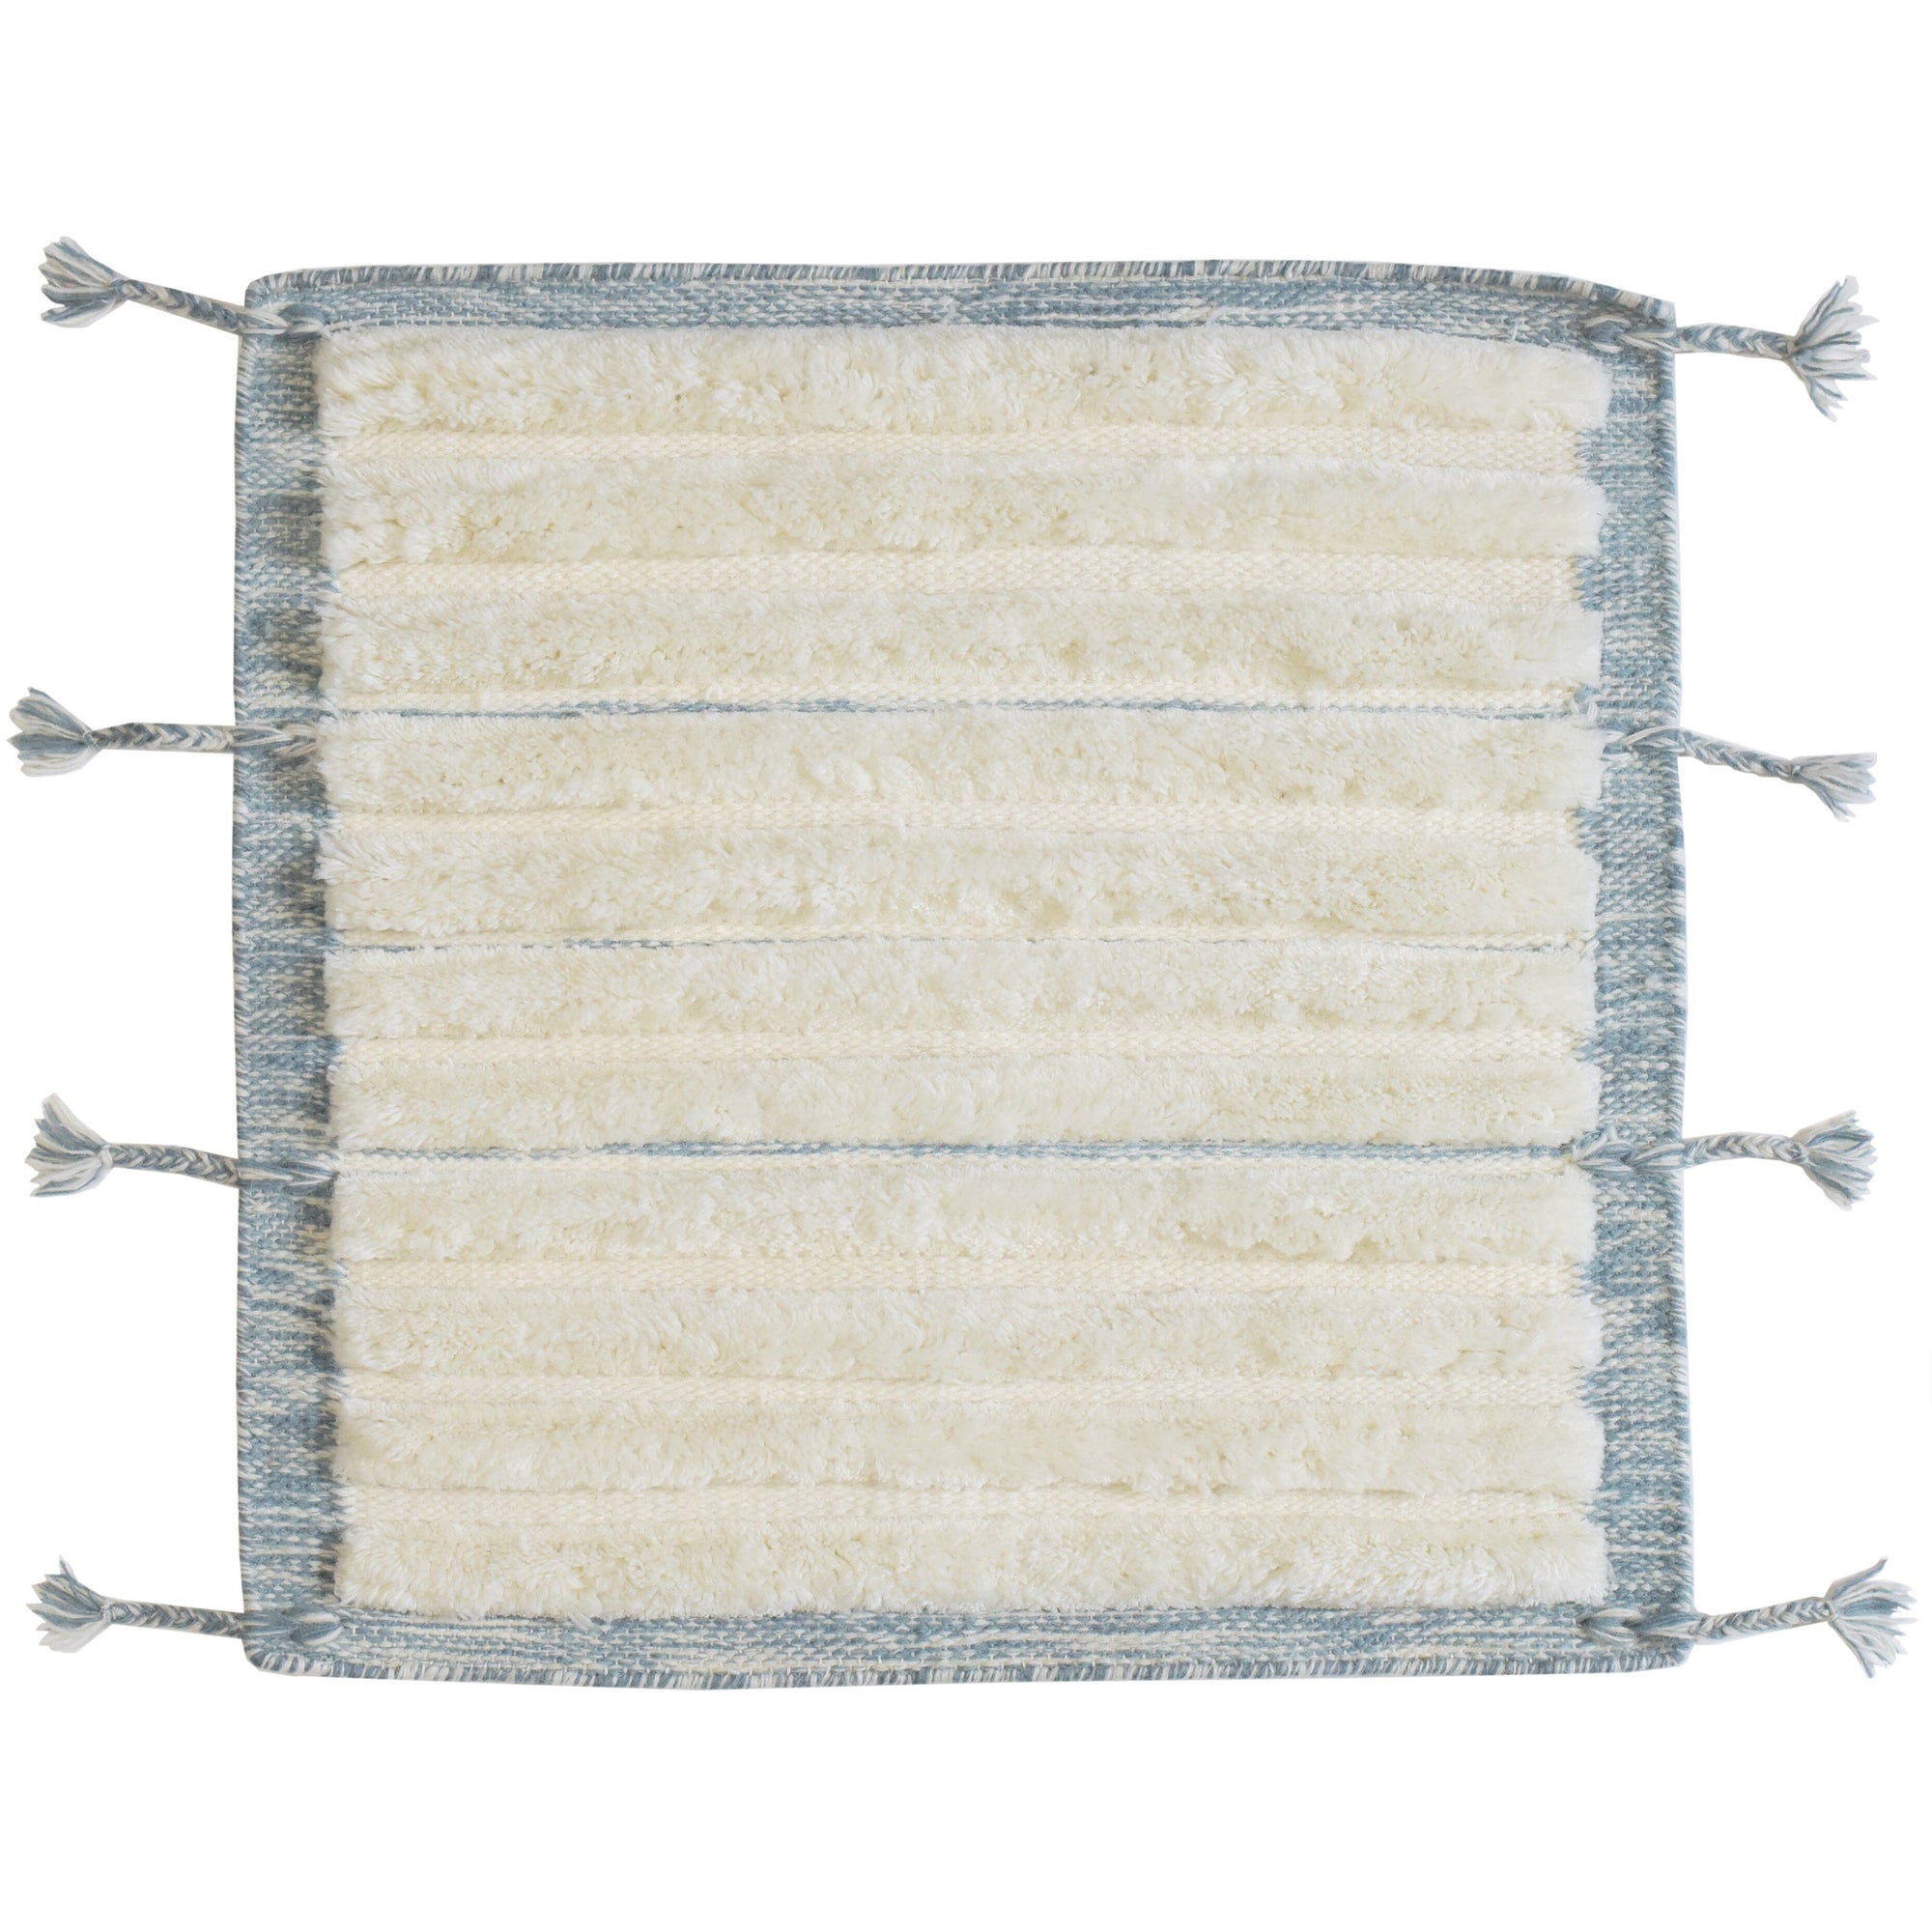 Taylor Ivory/Blue Border Wool Handknotted with Shag Pile SAMPLE Rugs Organic Weave Shop 